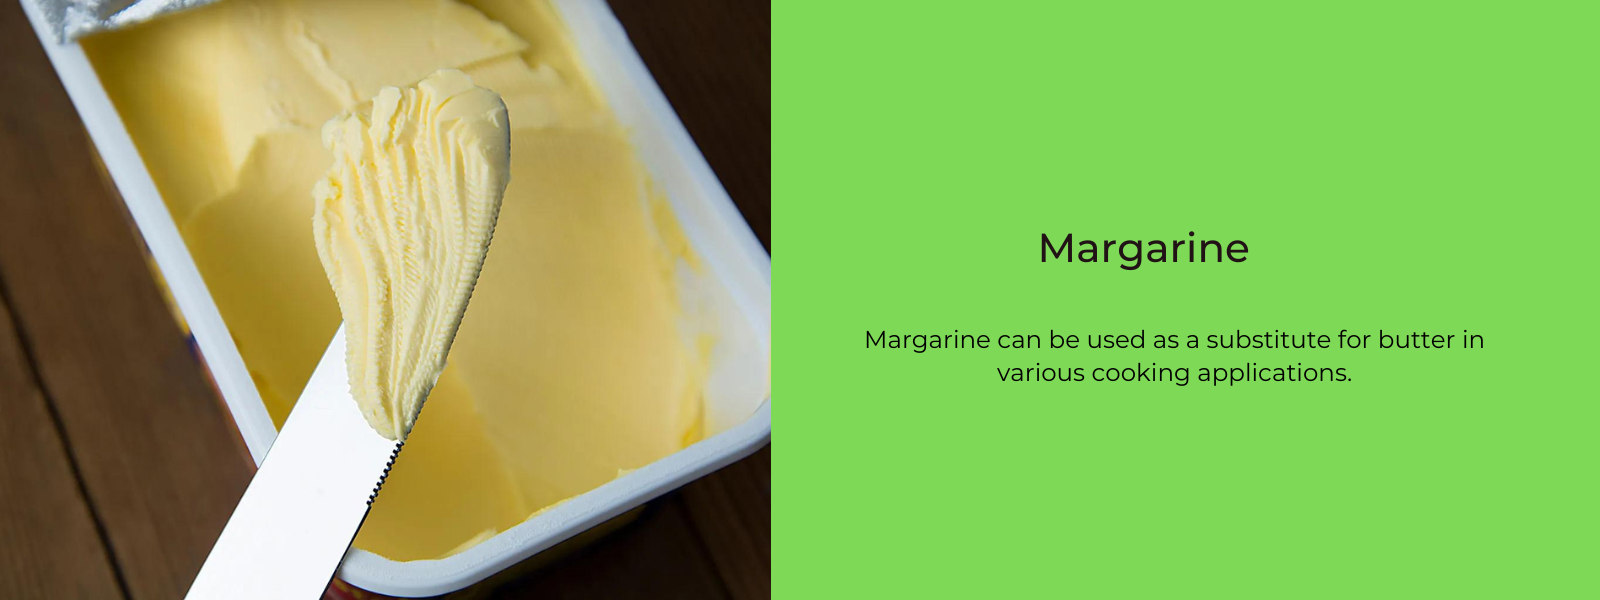 Margarine - Health Benefits, Uses and Important Facts